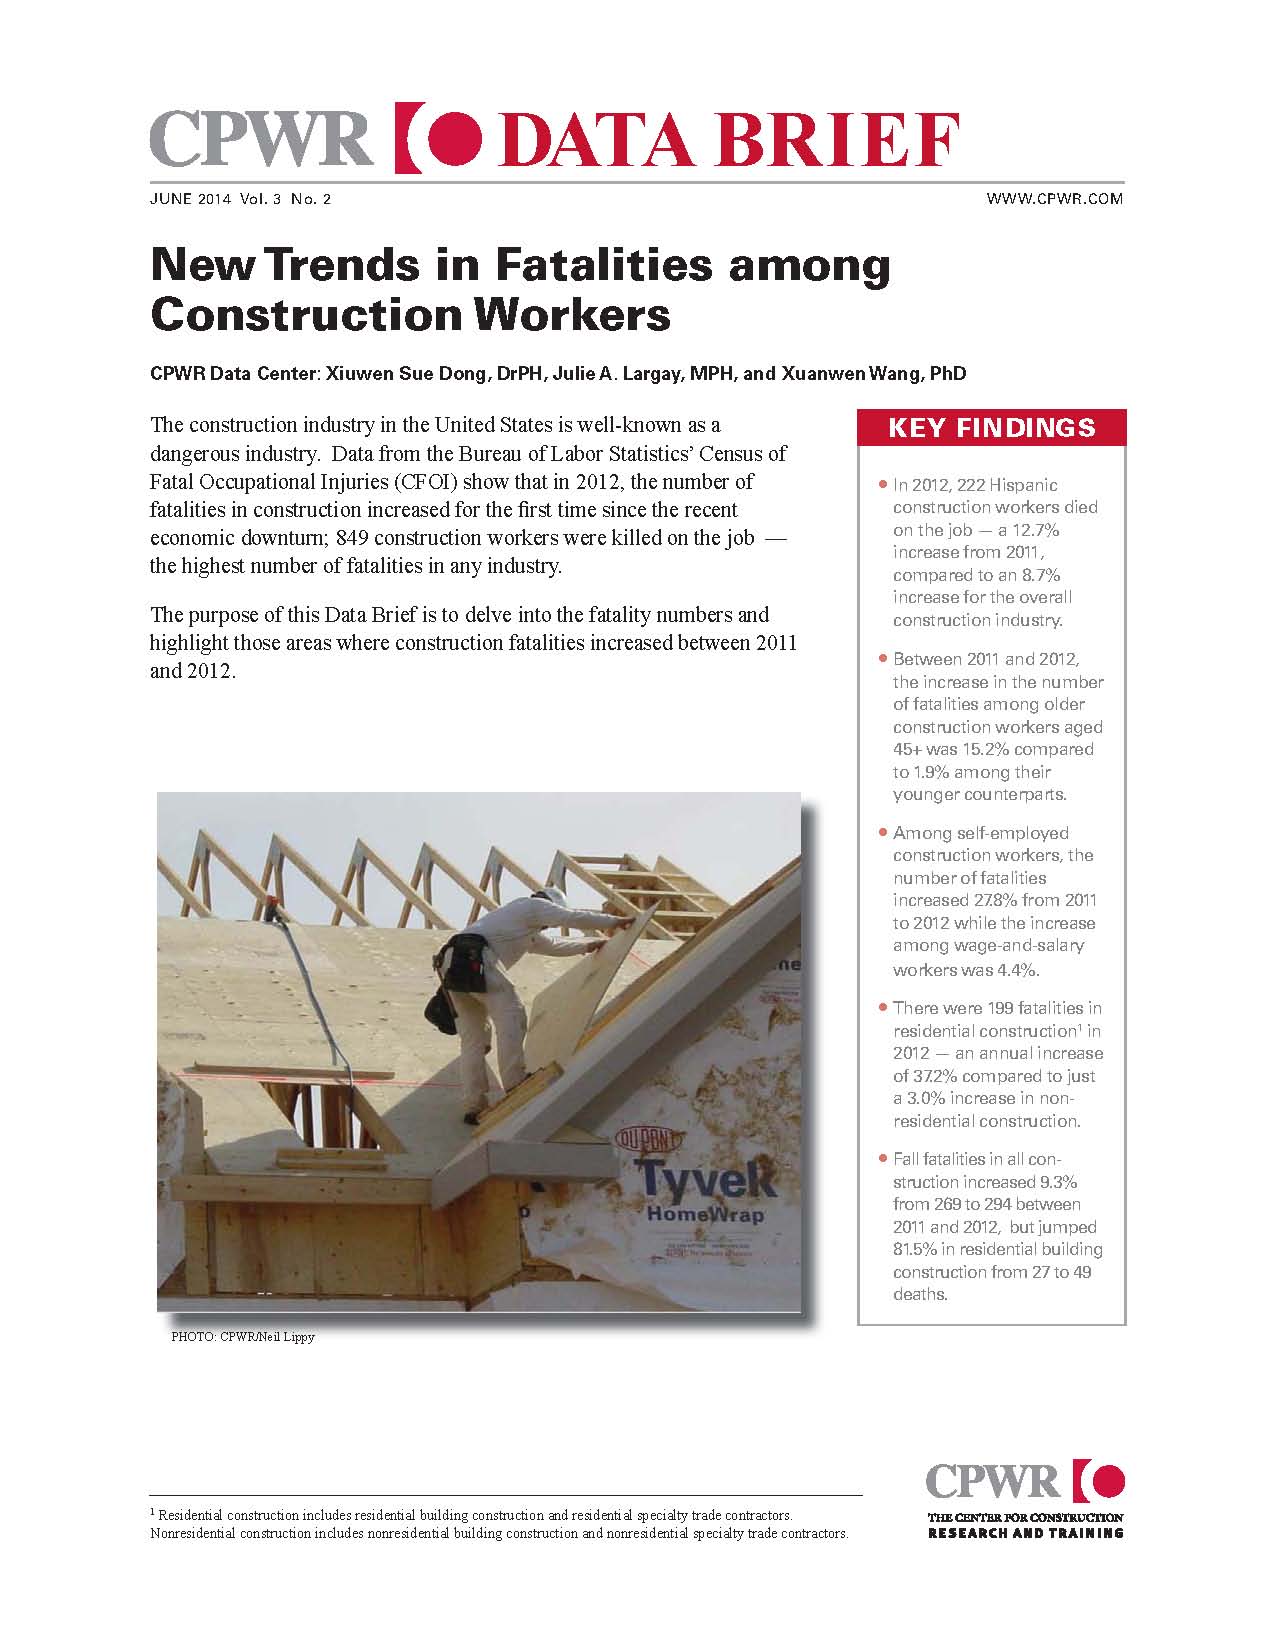 Pages from Data Brief- New Trends in Fatalities among Construction Workers